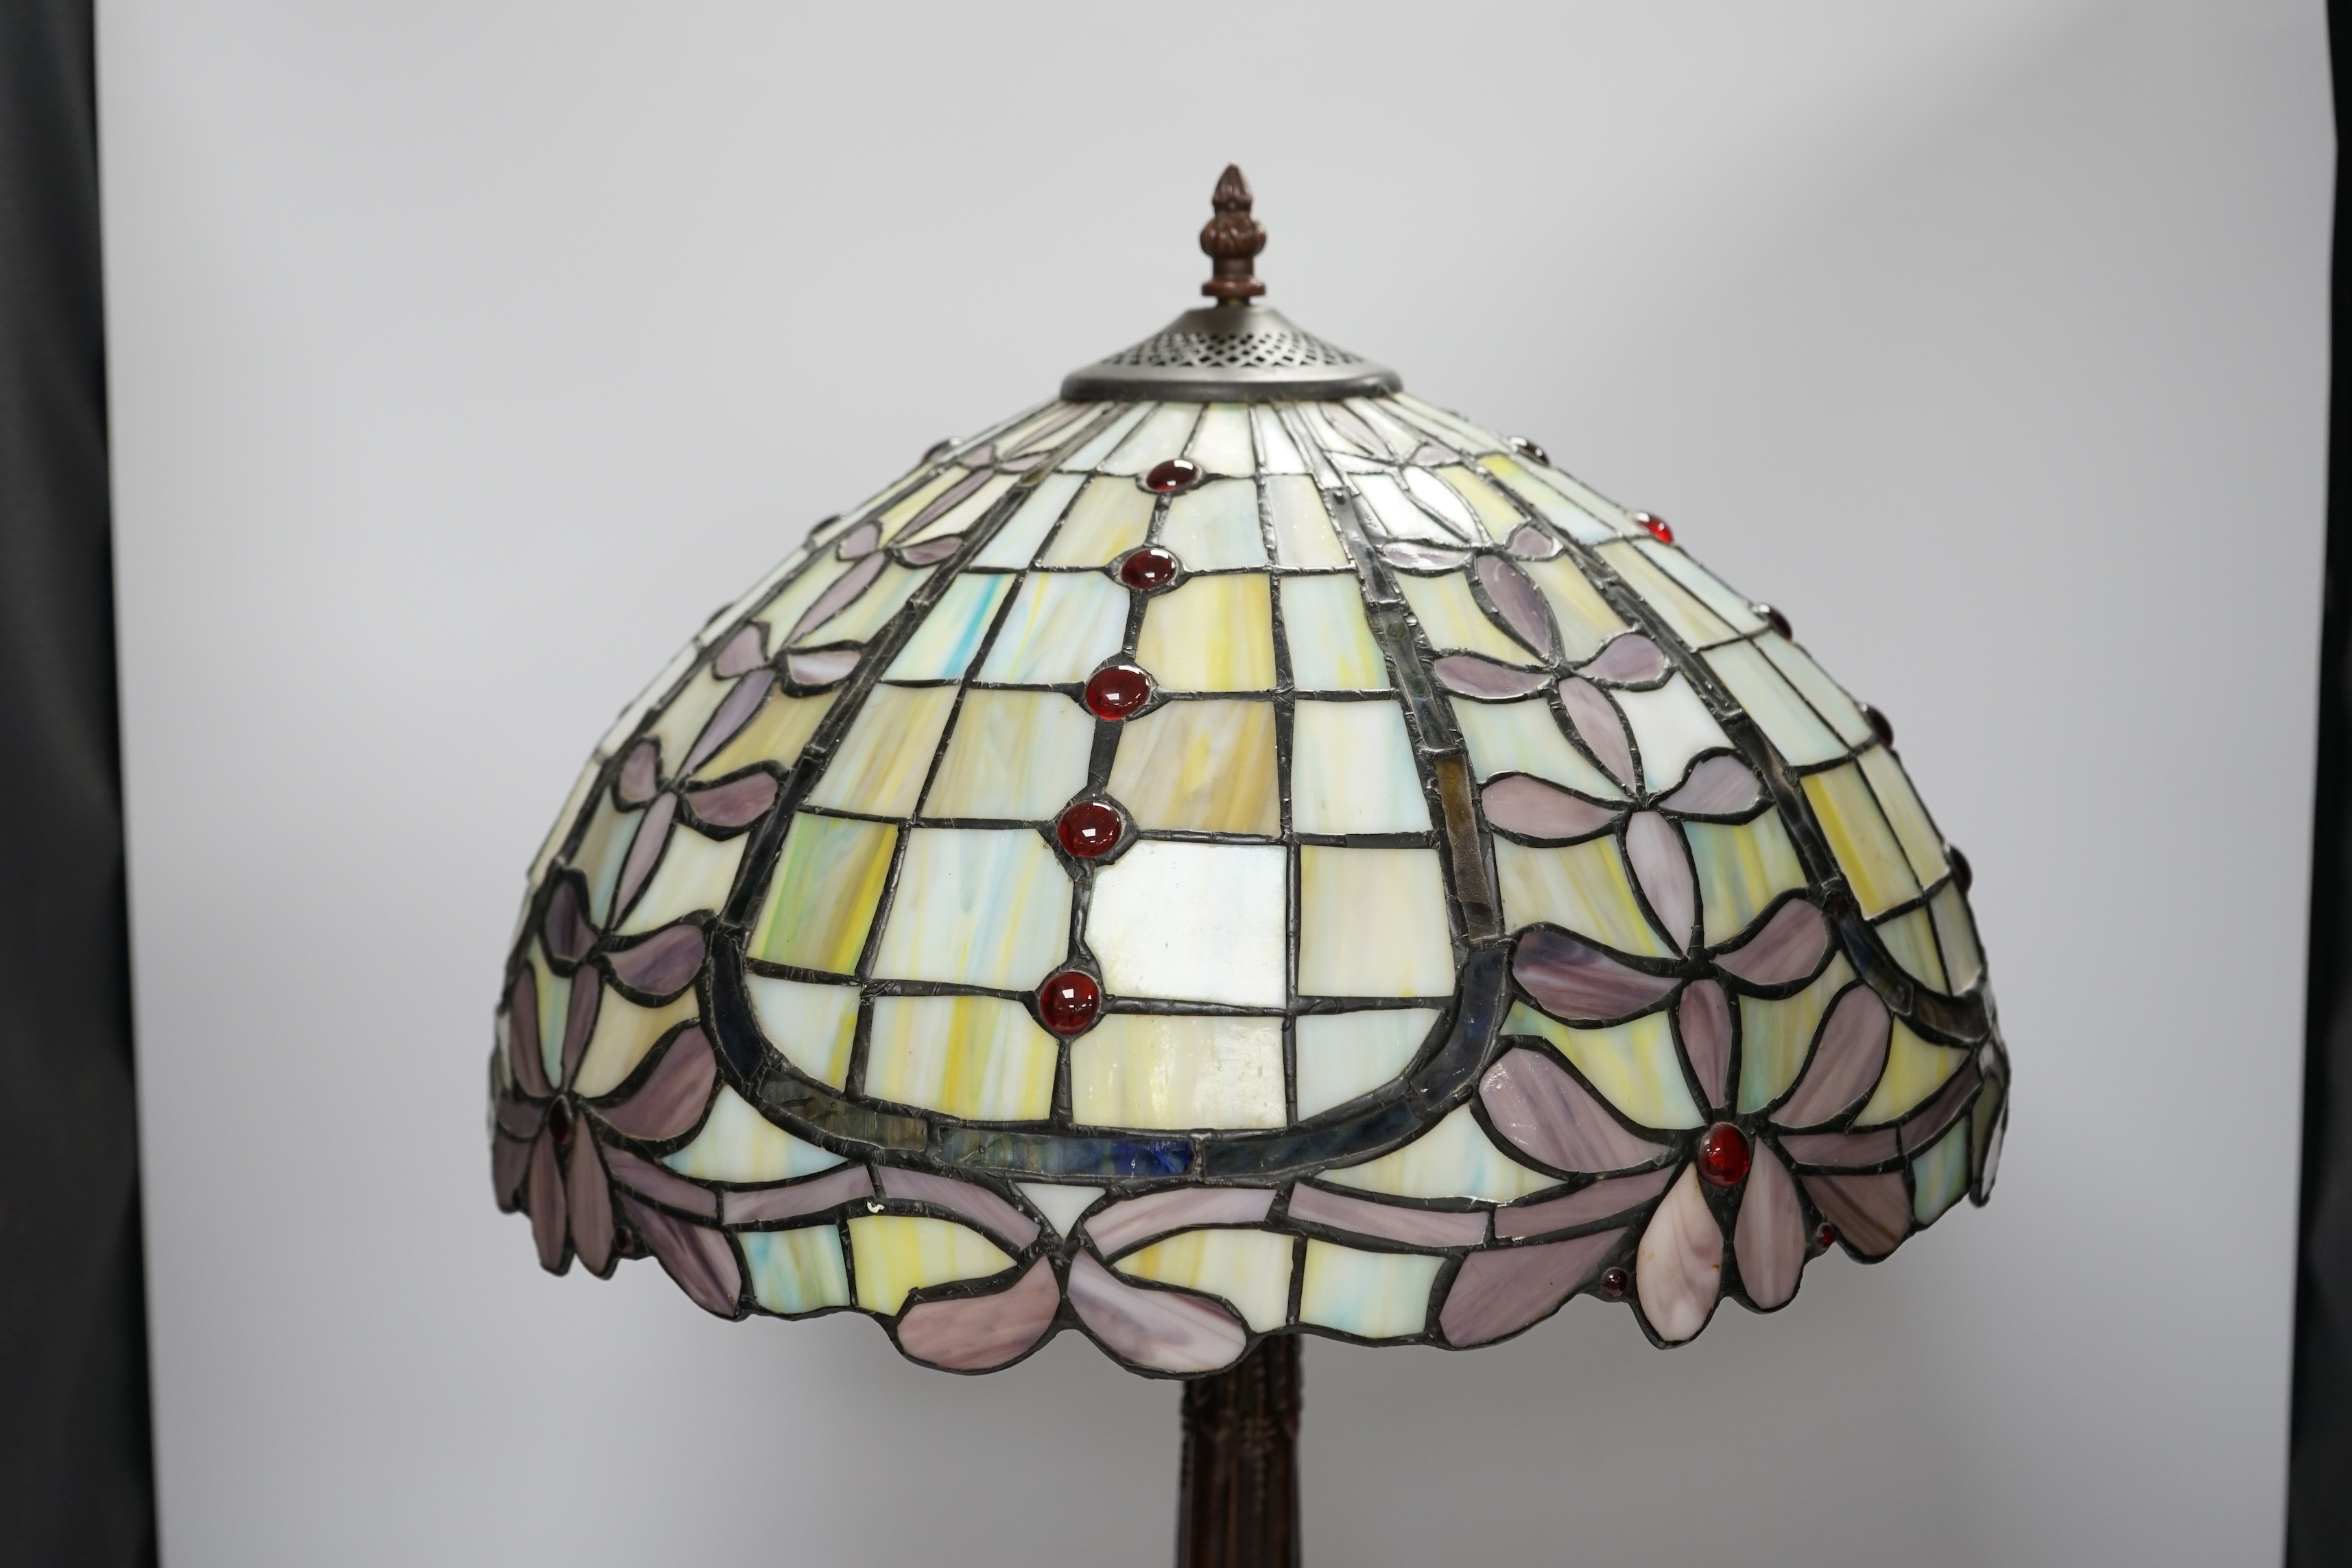 A reproduction Tiffany style table lamp, approximately 60cm high. Condition - good